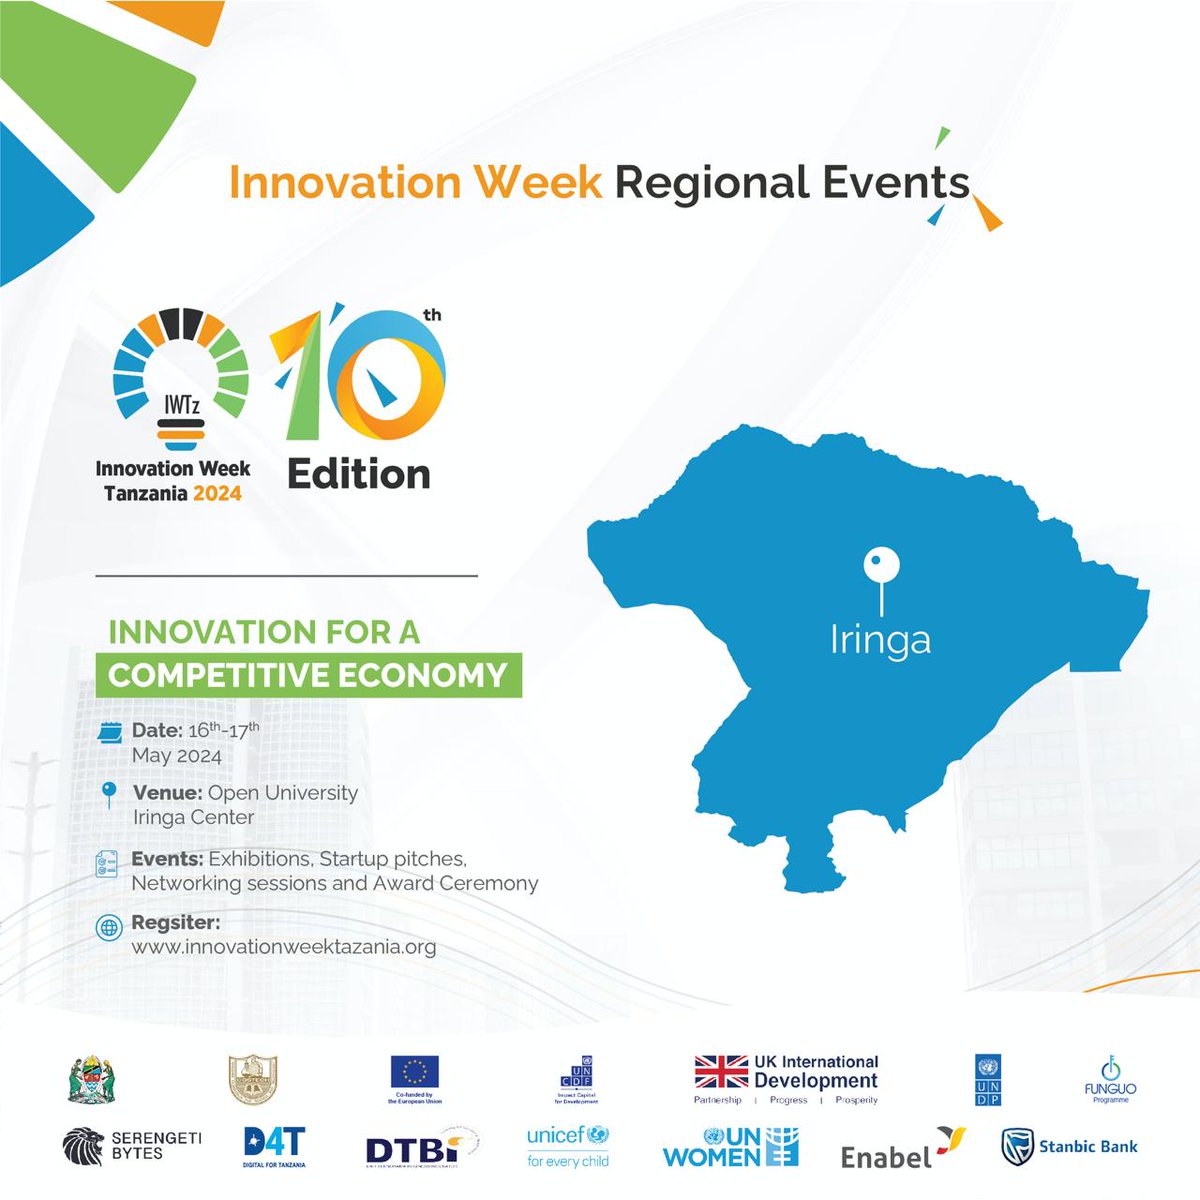 Iringa! Innovation Week Tanzania 2024 will be taking place in Iringa from the 16th to the 17th of May 2024, at the Open University in Iringa Center! Make sure you attend the exhibitions, startup pitches, networking sessions and award ceremony! This is one not miss! #IWTz2024